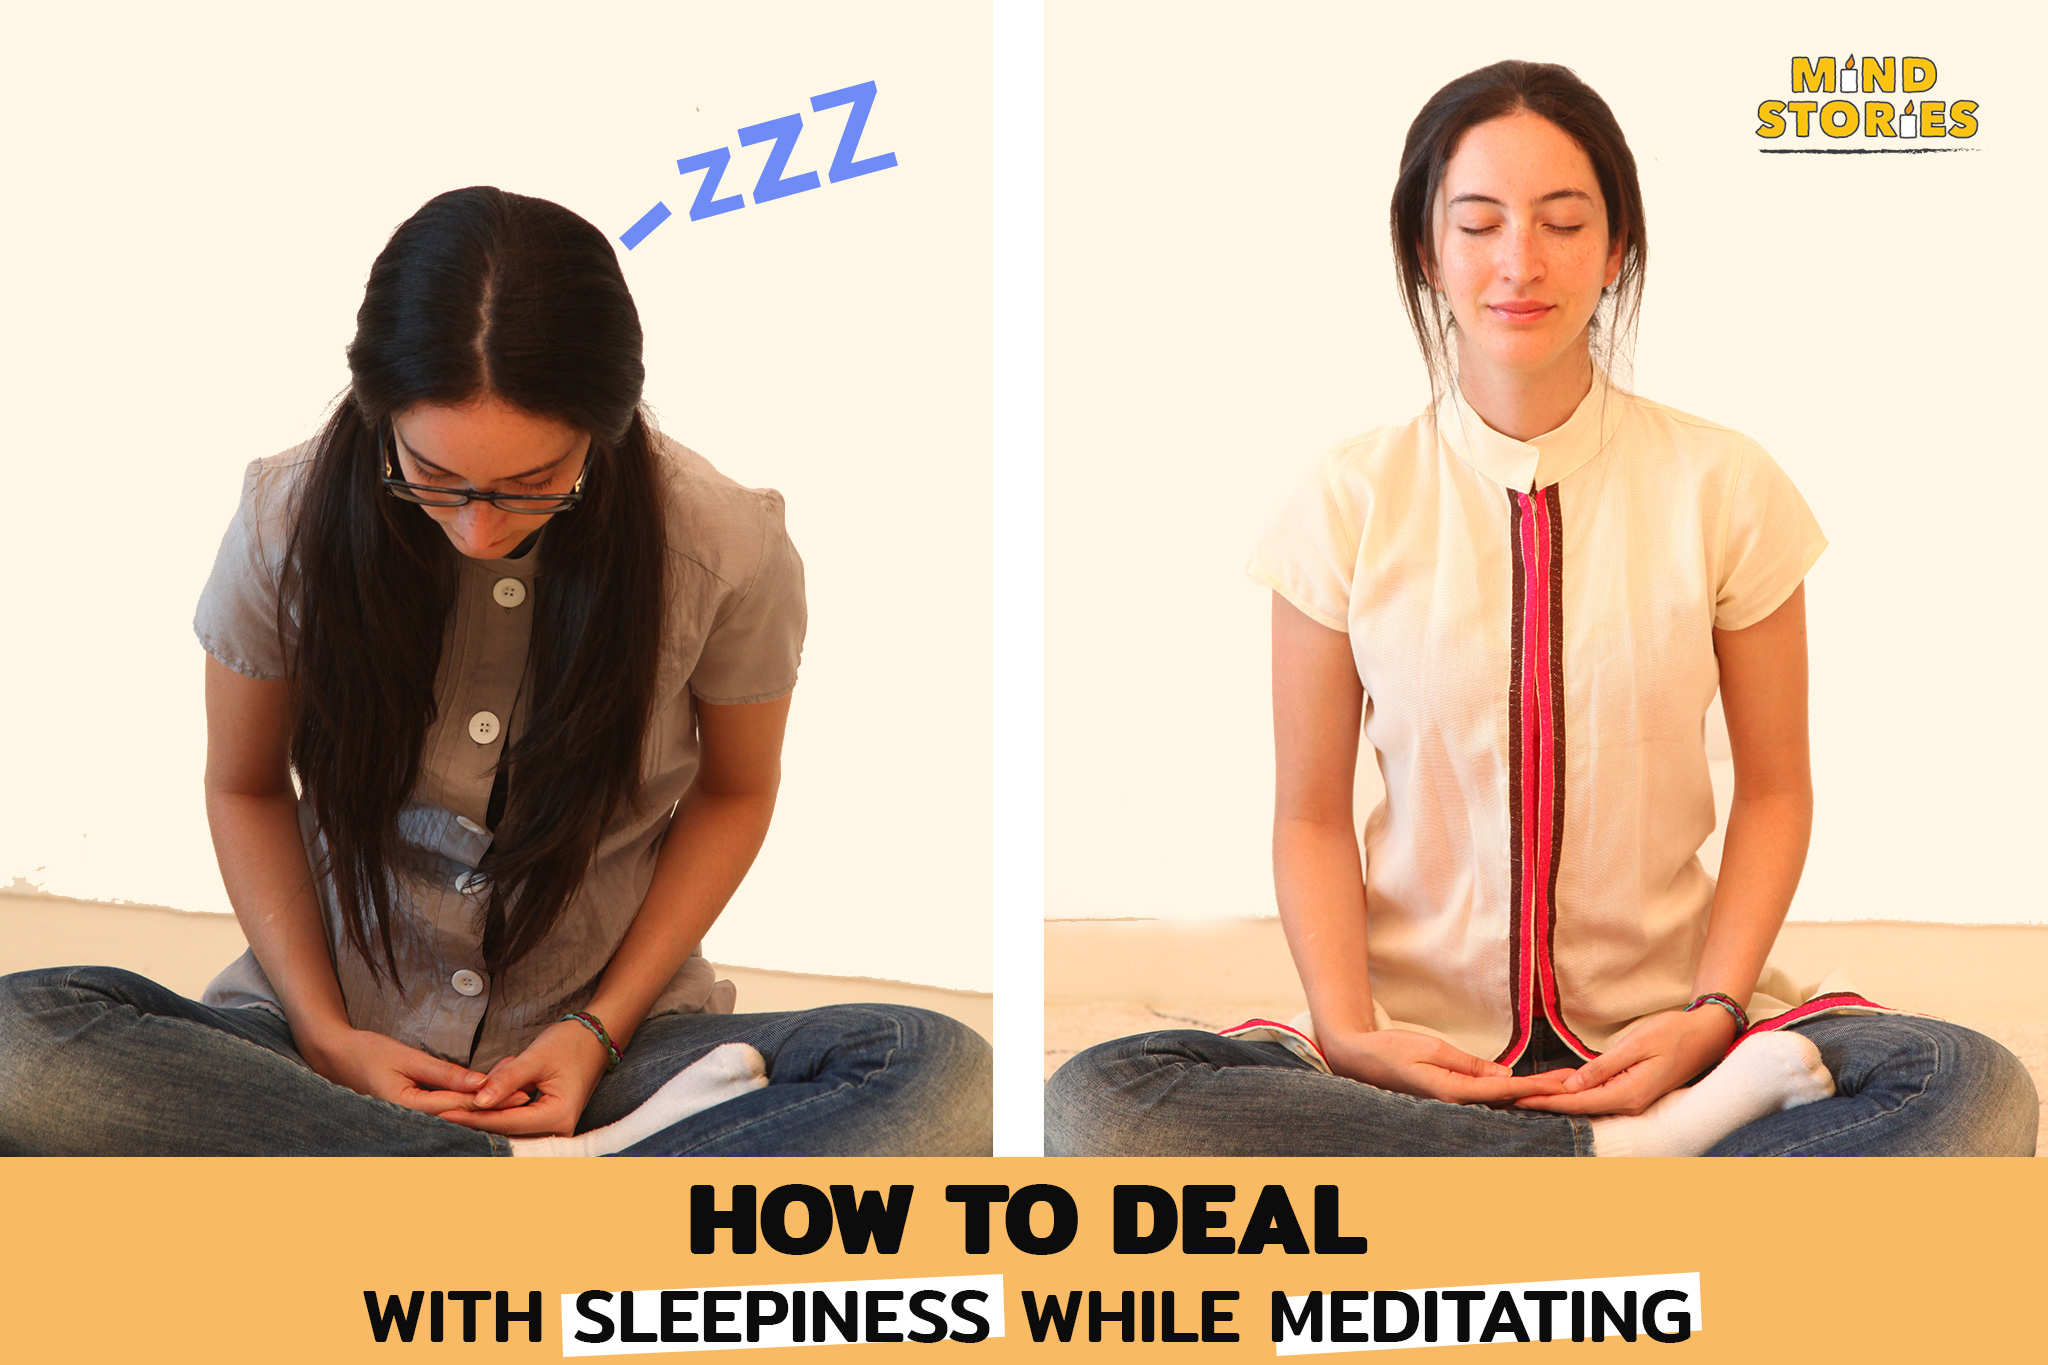 image from How to deal with sleepiness while meditating